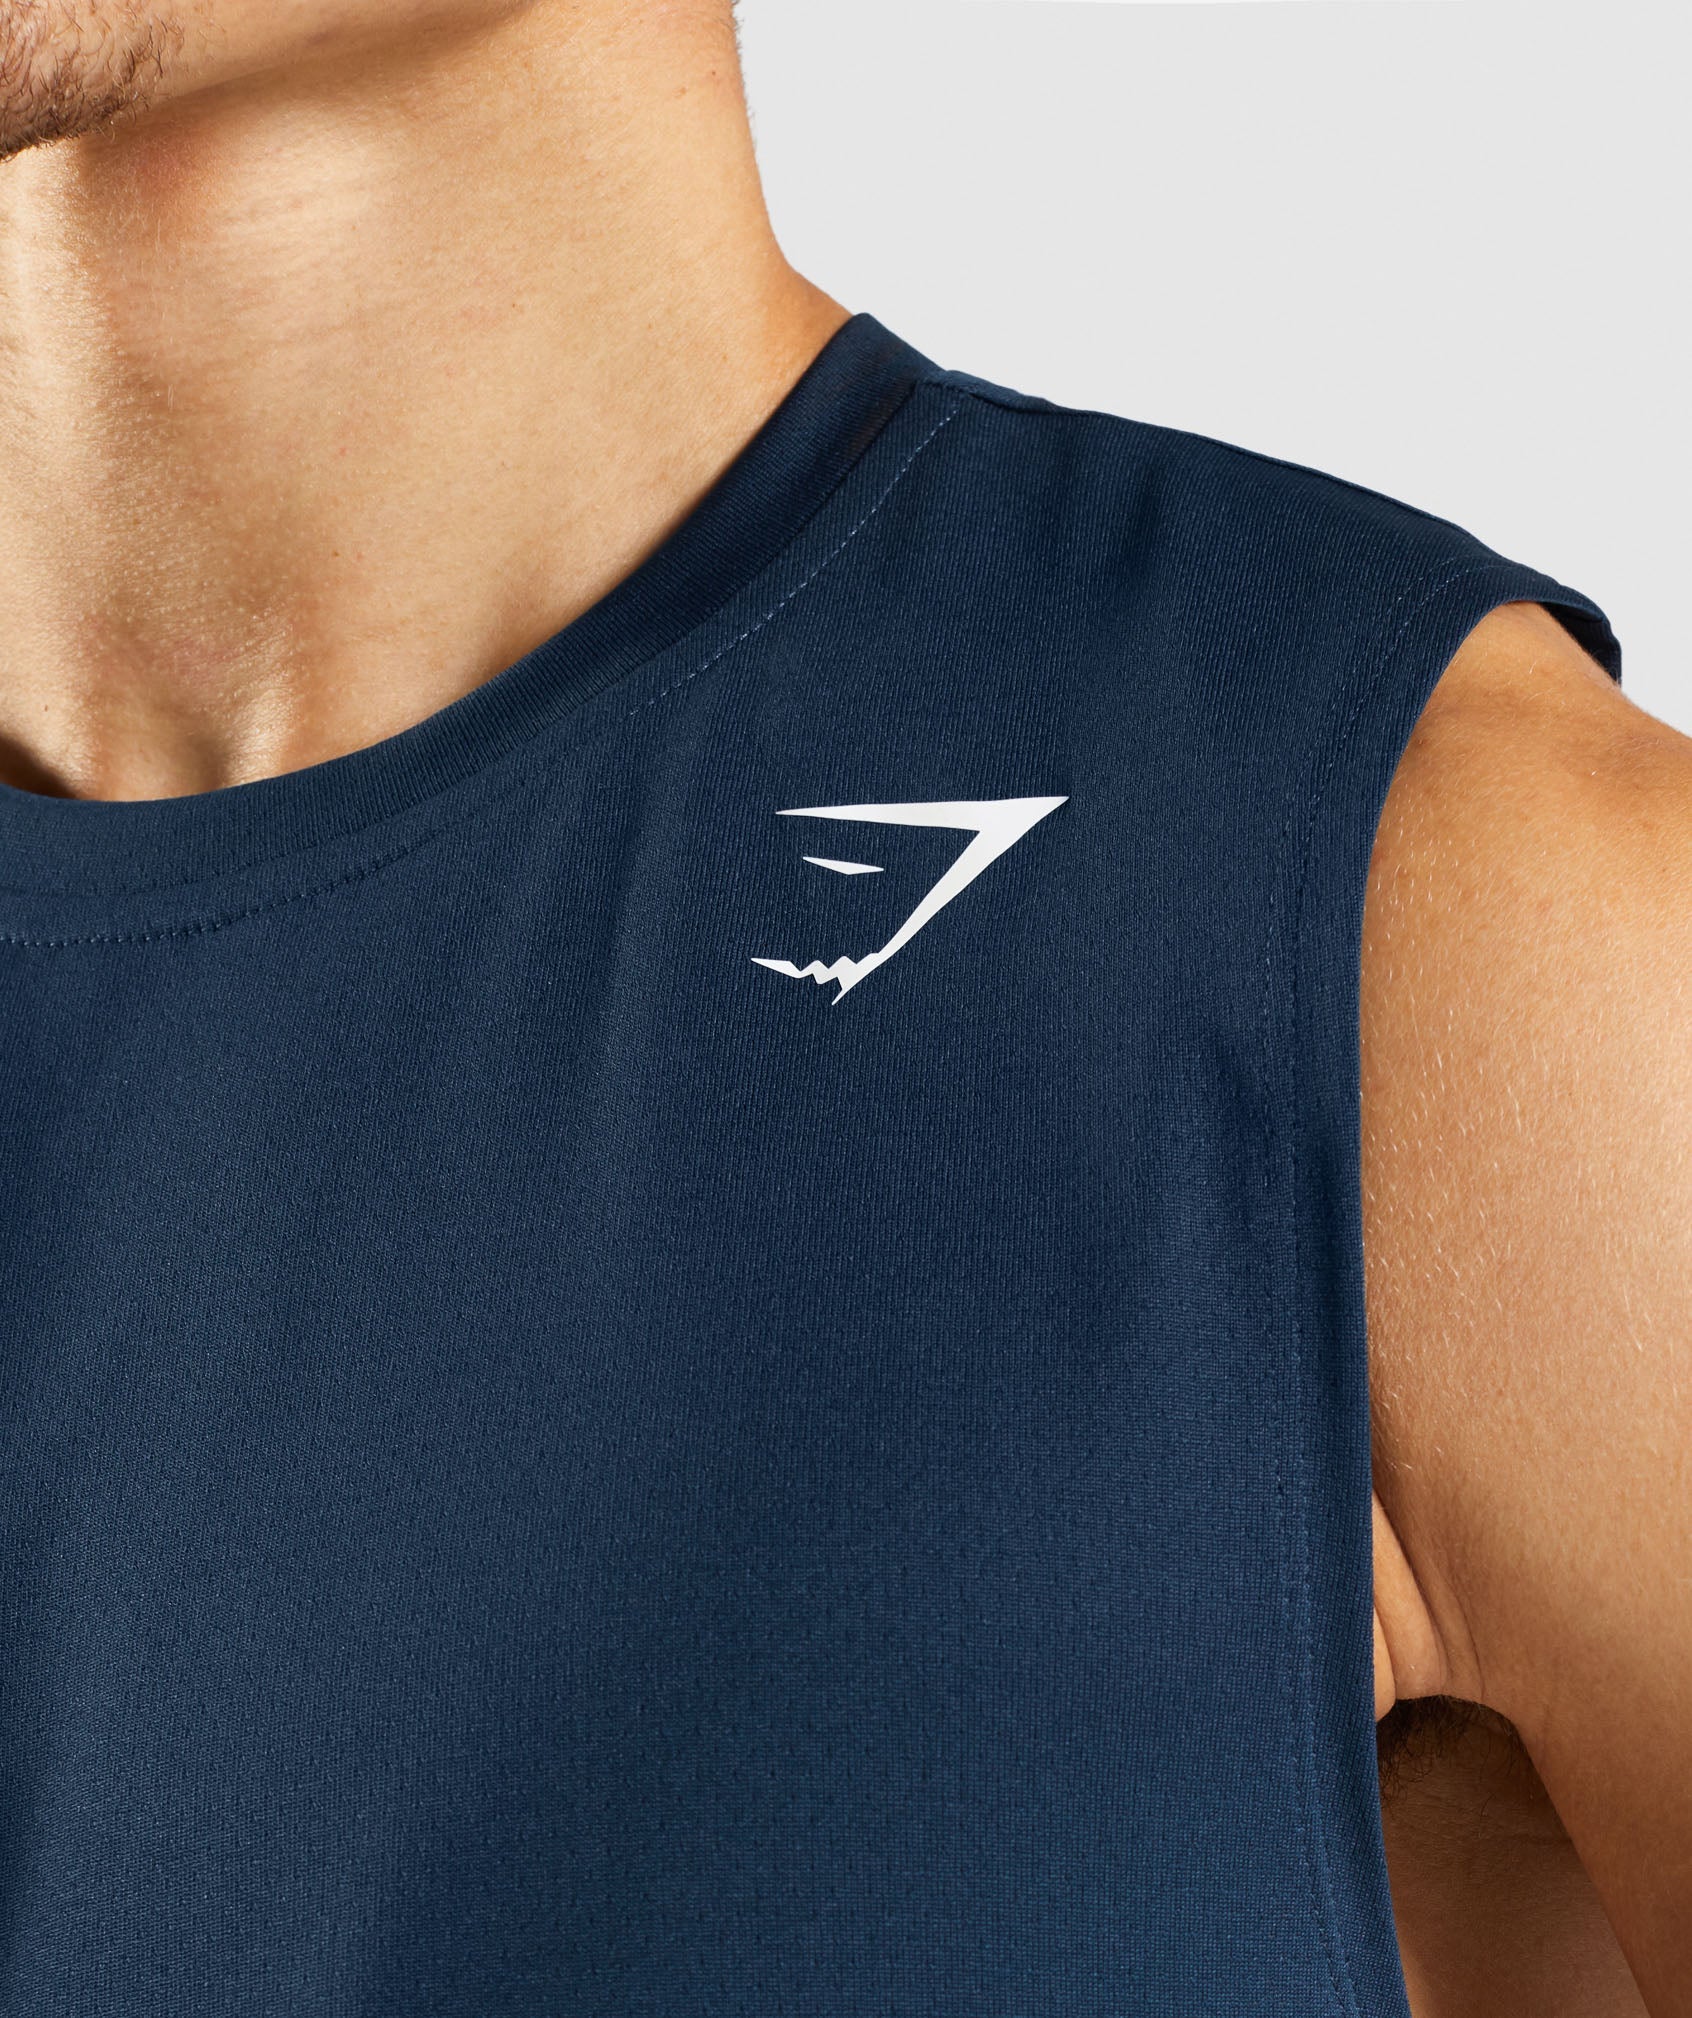 Arrival Sleeveless T-Shirt in Navy - view 6